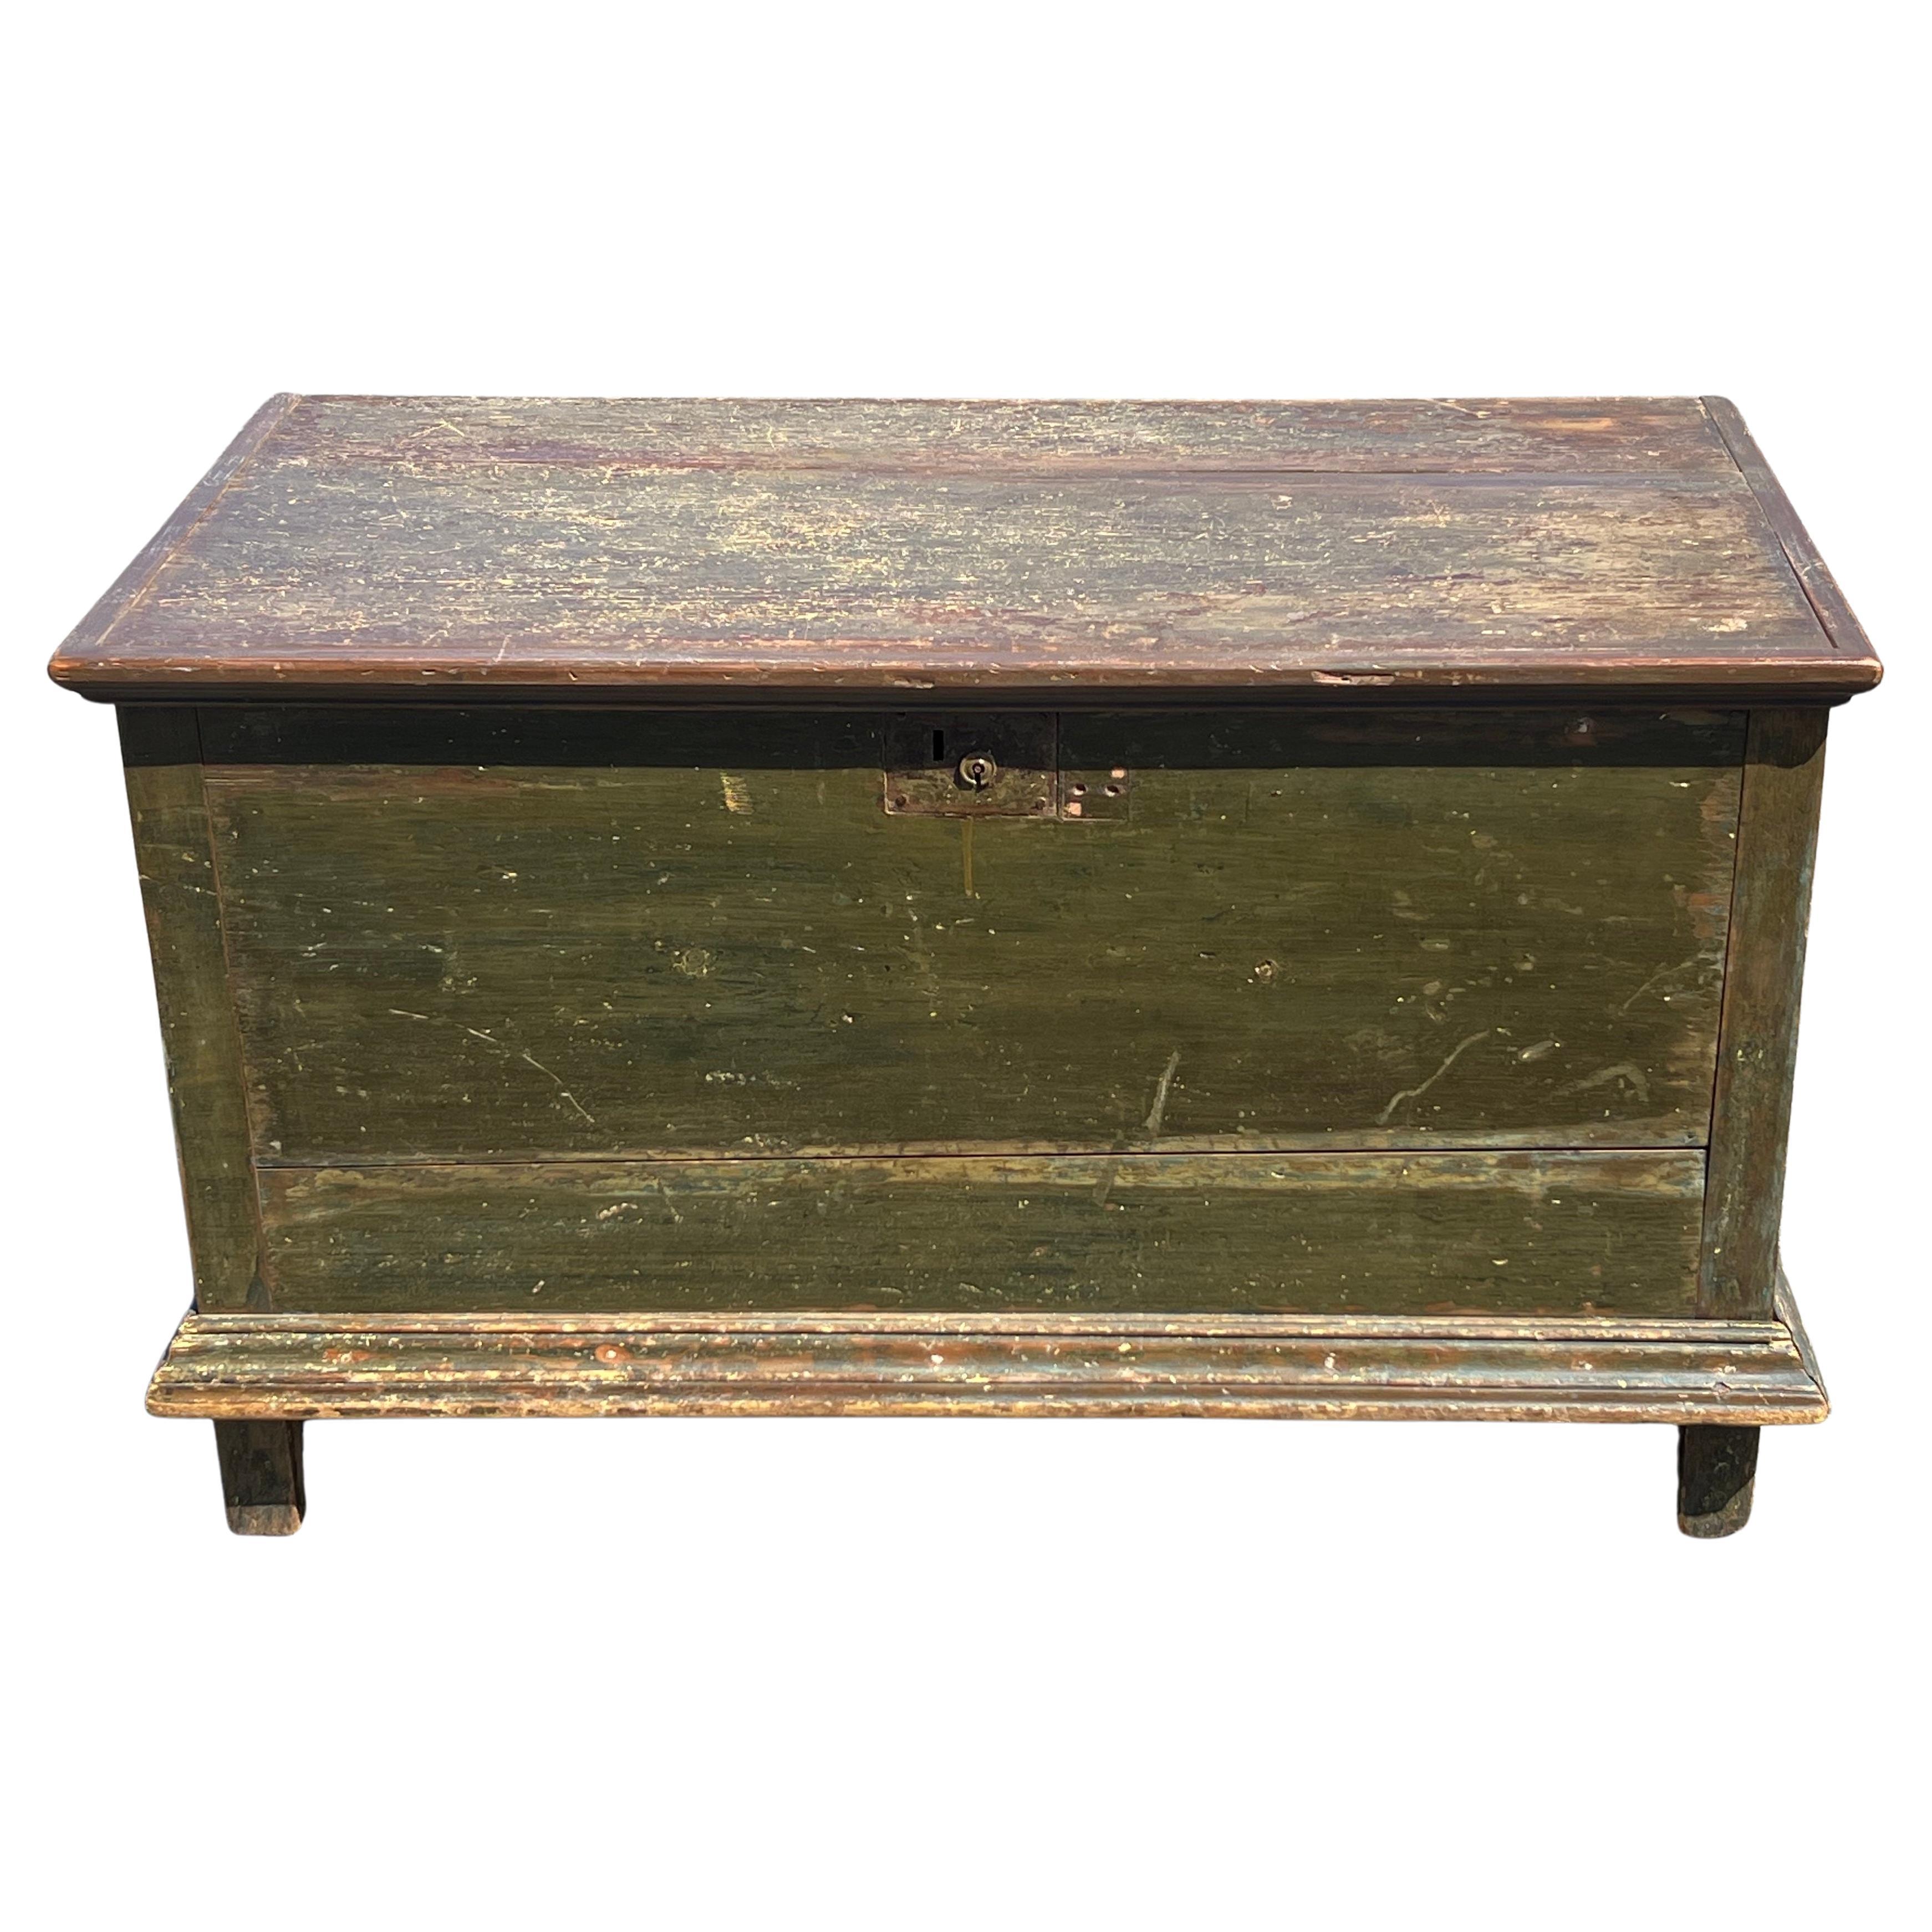 19th Century Pine Blanket Chest in Original Olive Green Paint